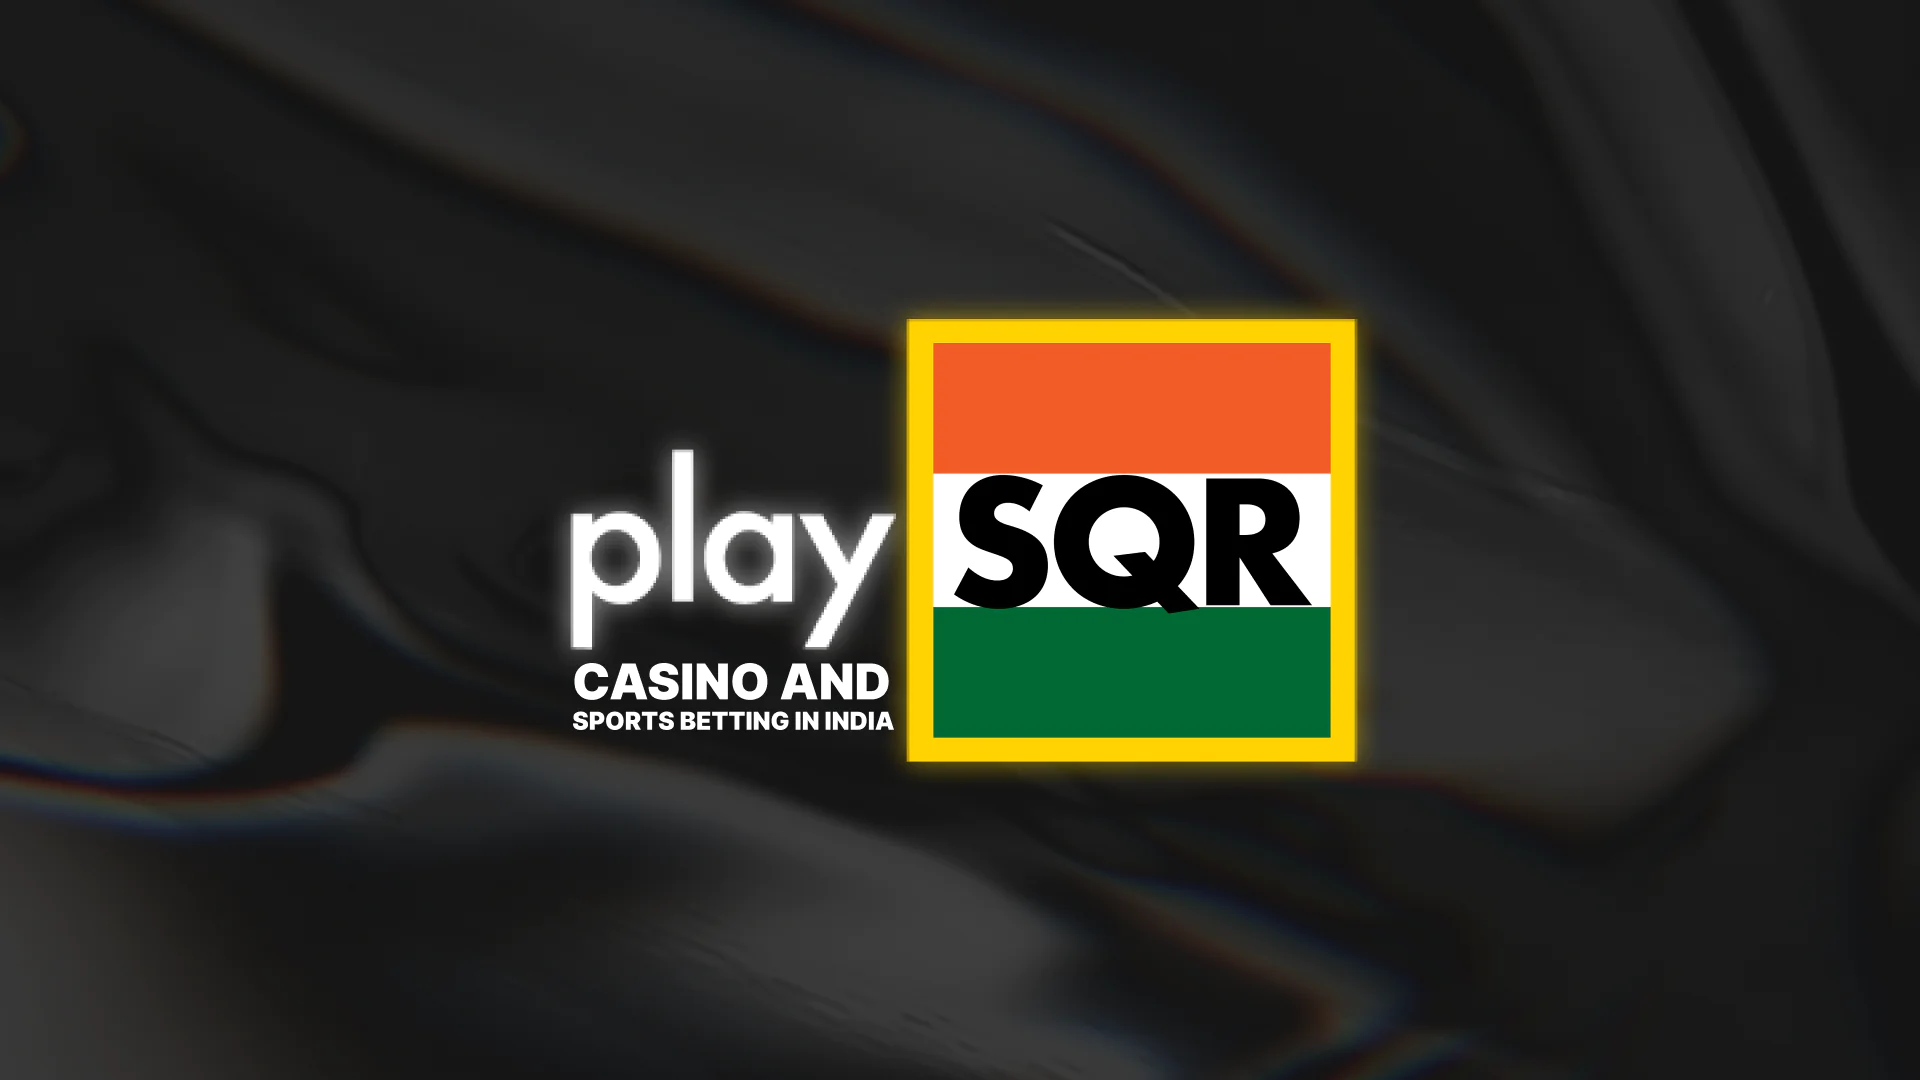 PlaySQR offering exciting casino games and sports betting for the Indian gamblers